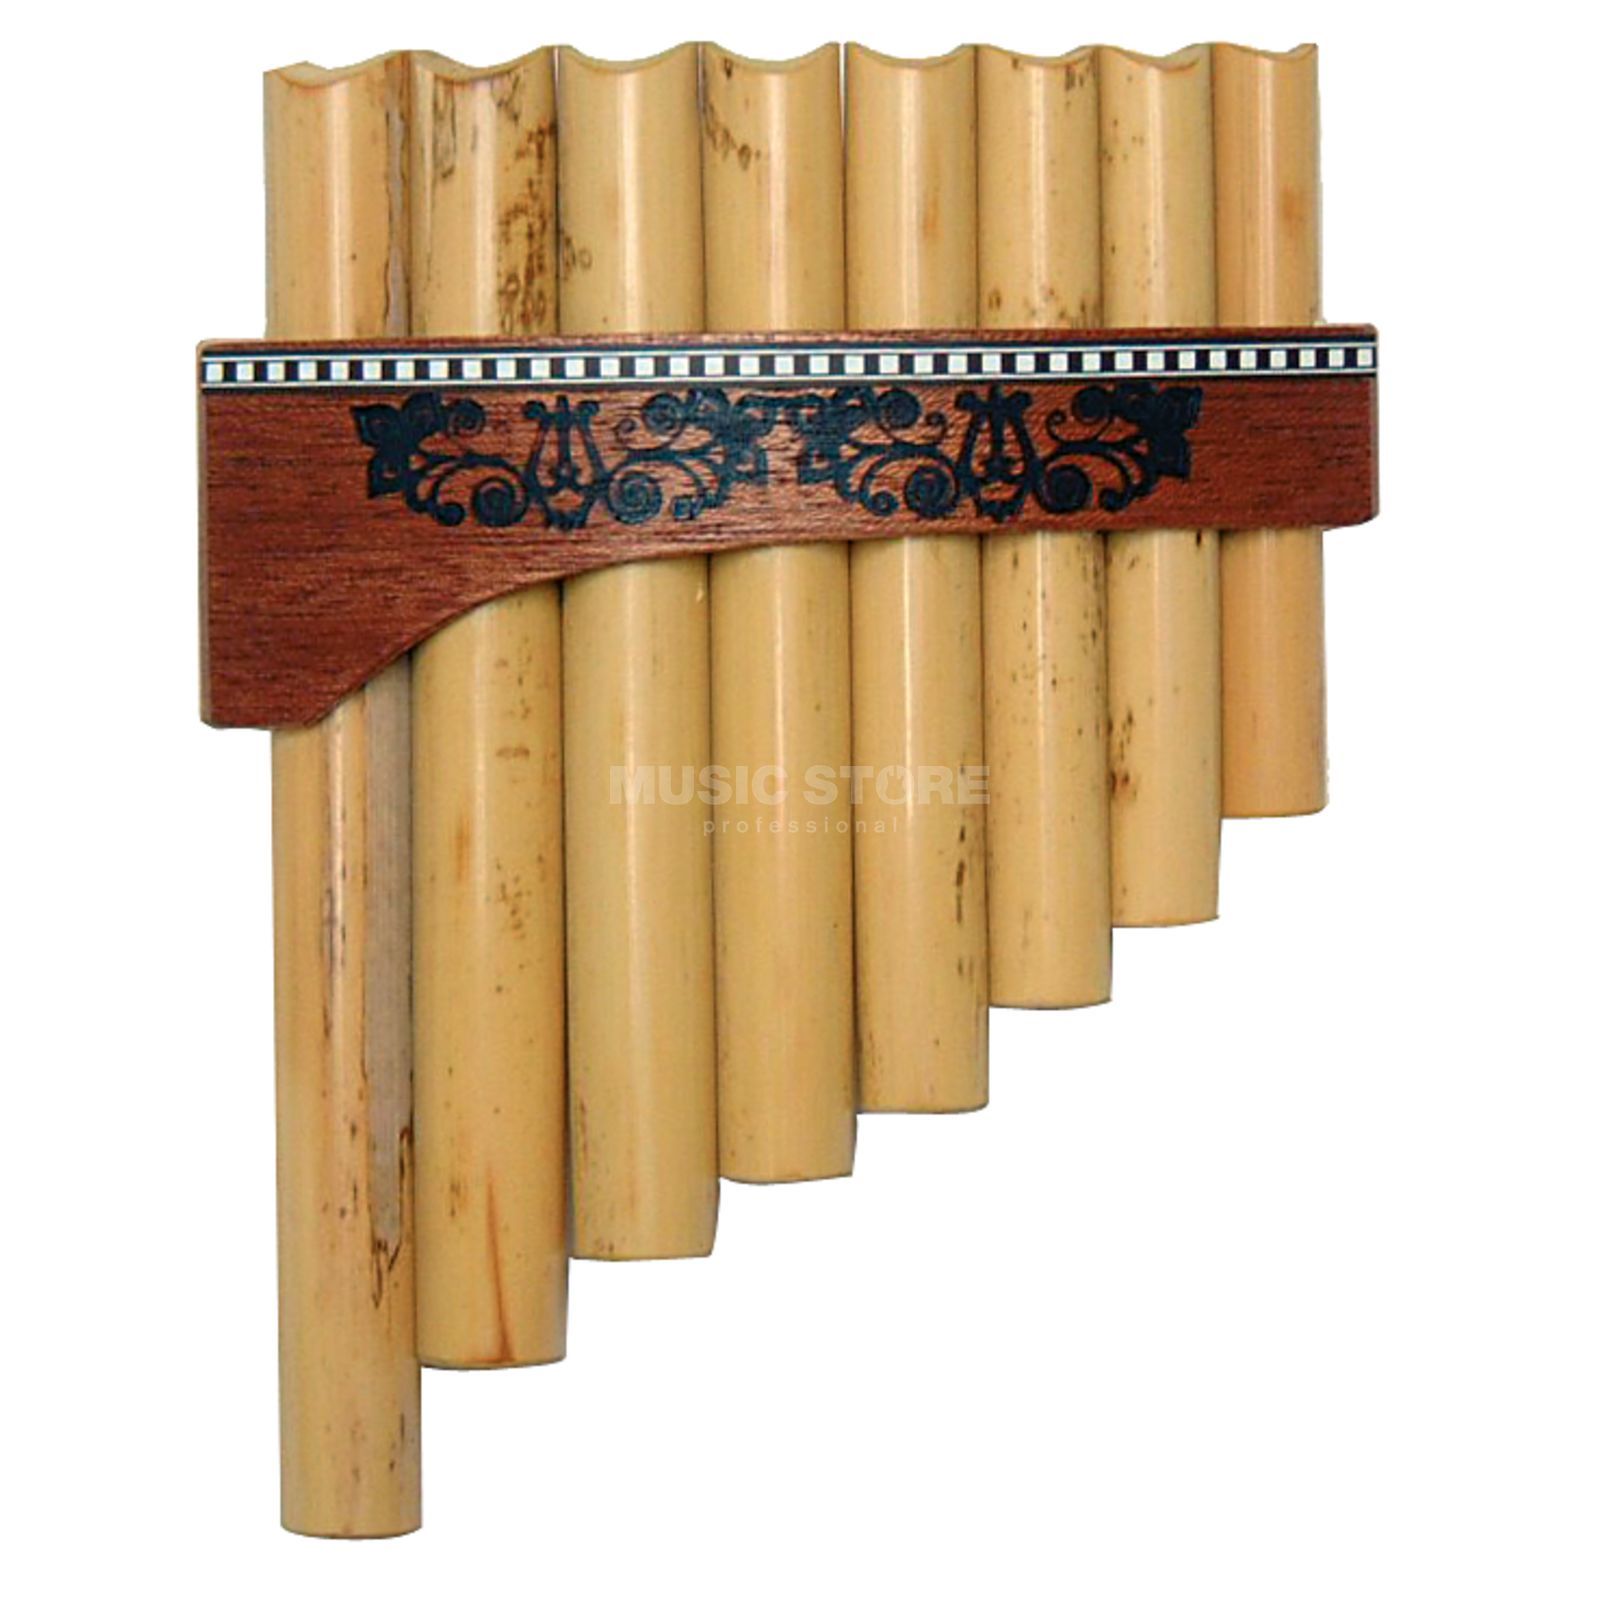 Pan flute pipes photo